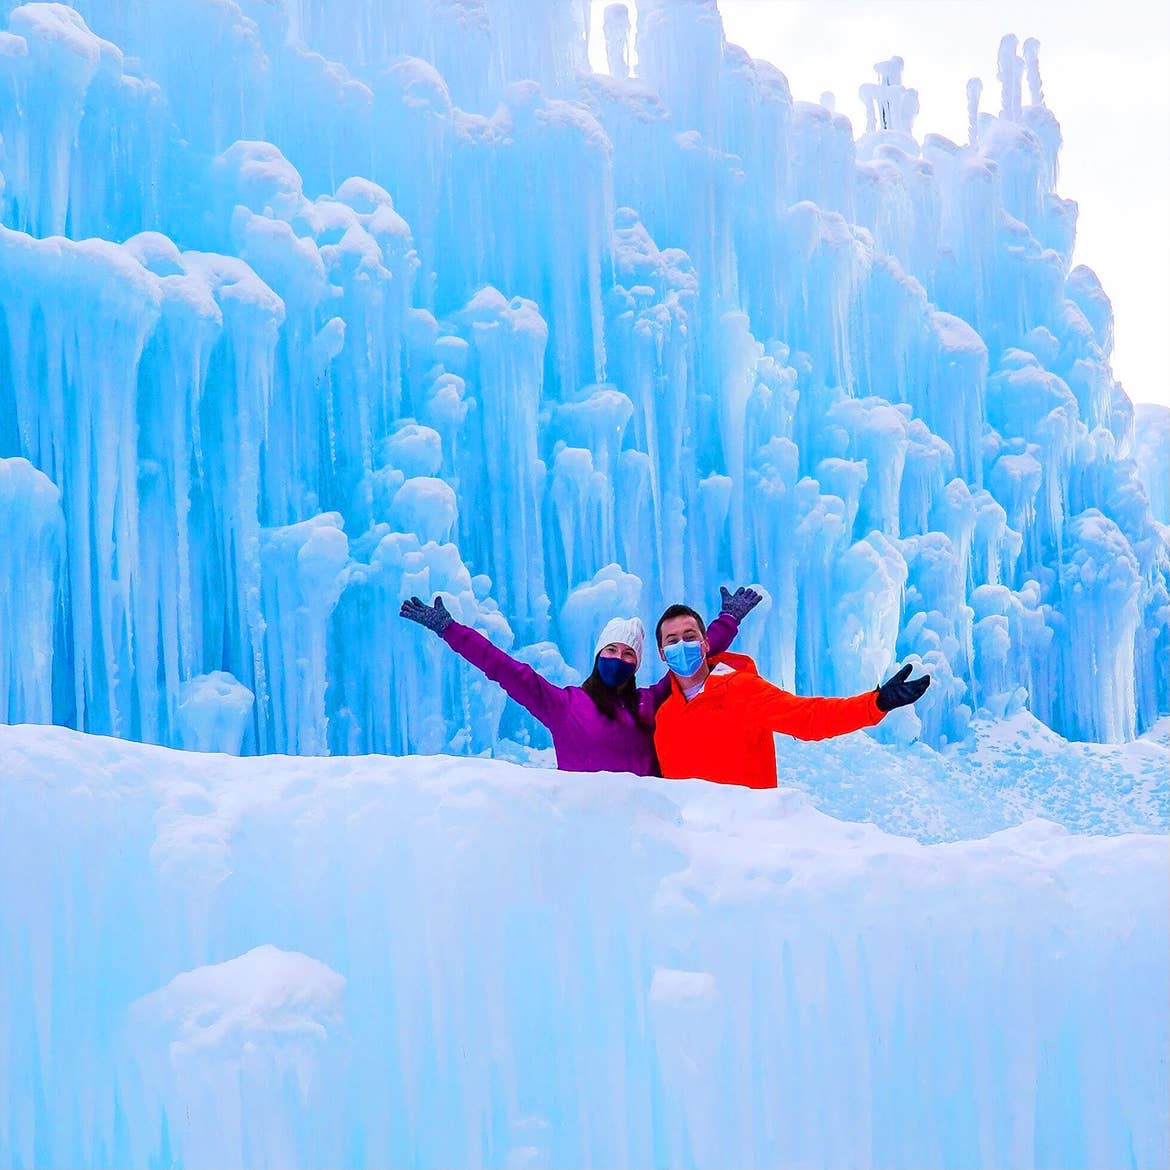 A woman in a white knit hat and purple jacket stands next to a man in an orange jacket in front of an ice castle formation.